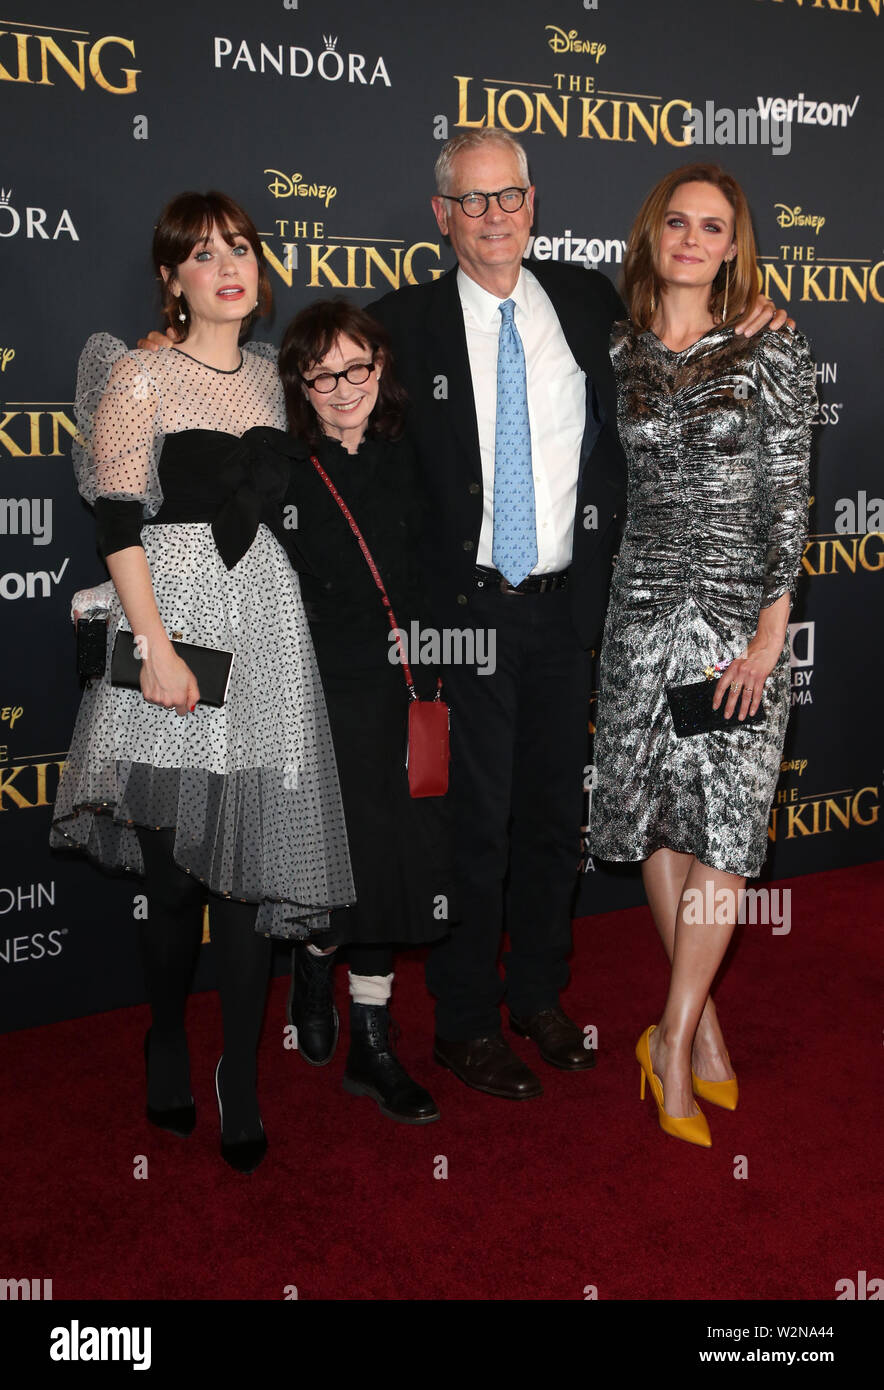 Hollywood, Ca. 9th July, 2019. Caleb Deschanel, Mary Jo Deschanel, Zooey Deschanel, Emily Deschanel, at The Lion King Film Premiere at El Capitan theatre in Hollywood, California on July 9, 2019. Credit: Faye Sadou/Media Punch/Alamy Live News Stock Photo